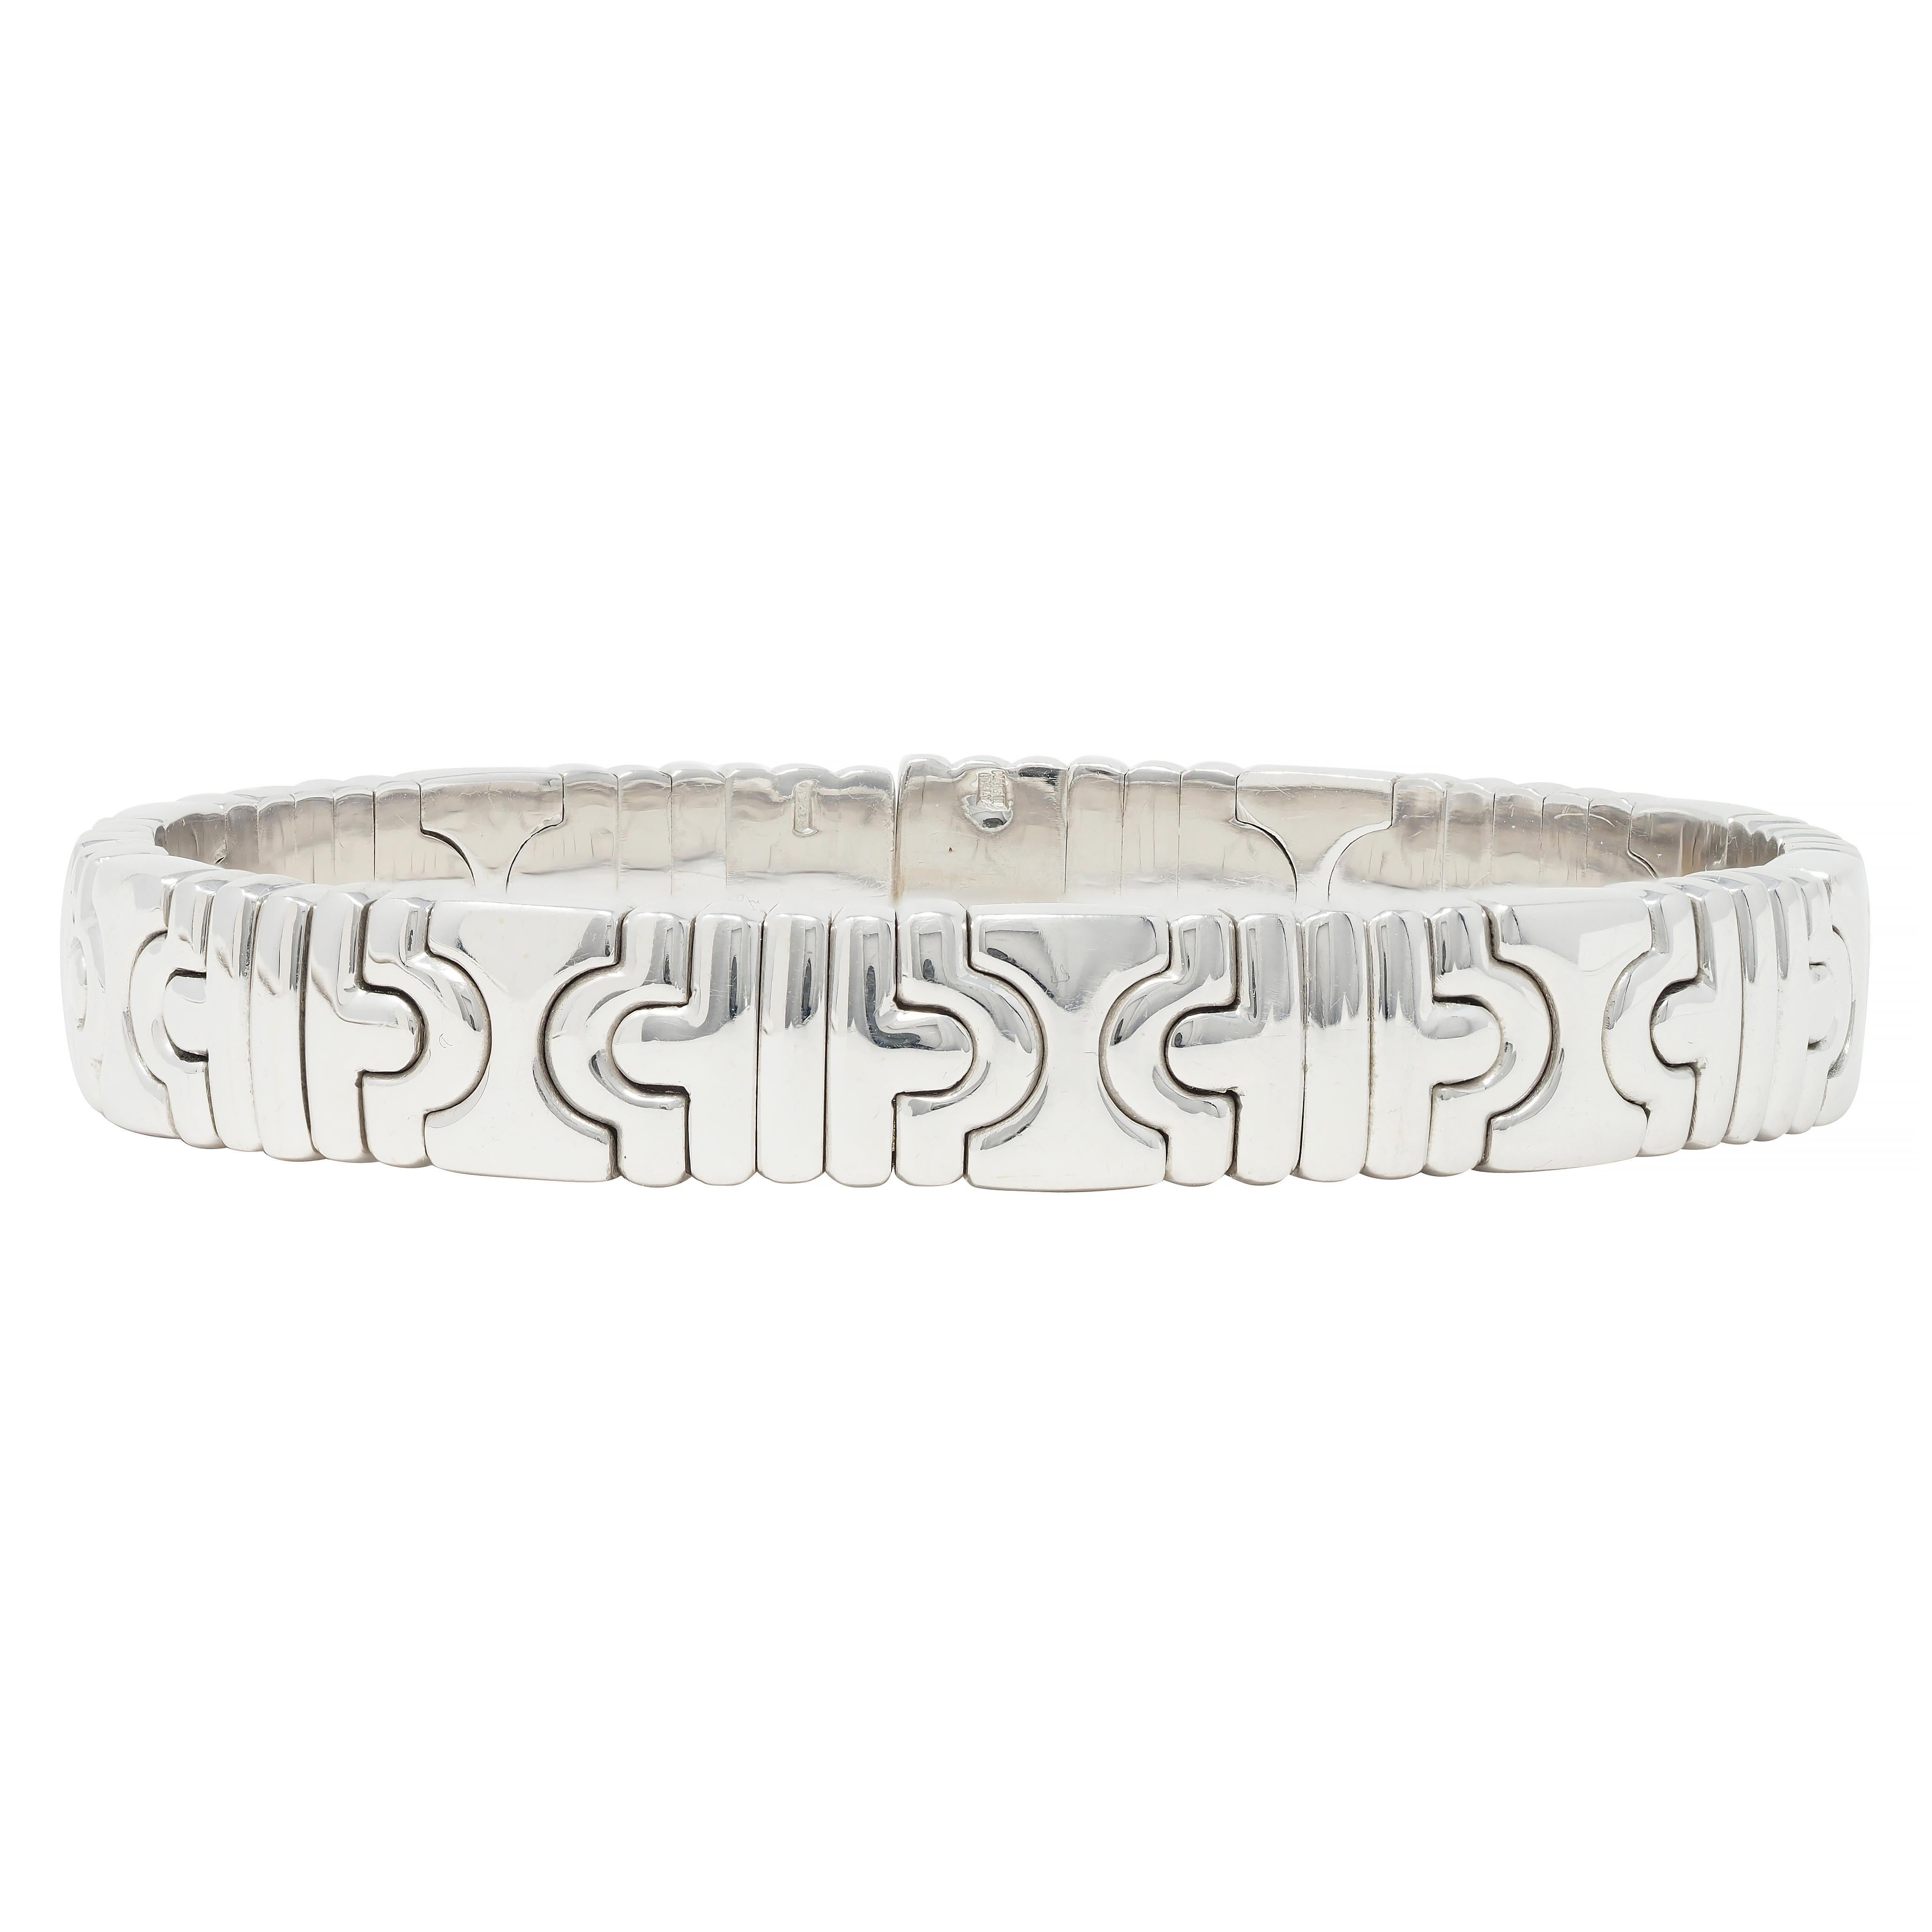 Bracelet is comprised of segmented links - with considerable flex
Links feature signature Parentesi motif - fitted curving segments
Featuring flush open terminals
With high polish finish
Stamped 750 with Italian assay marks for 18 karat